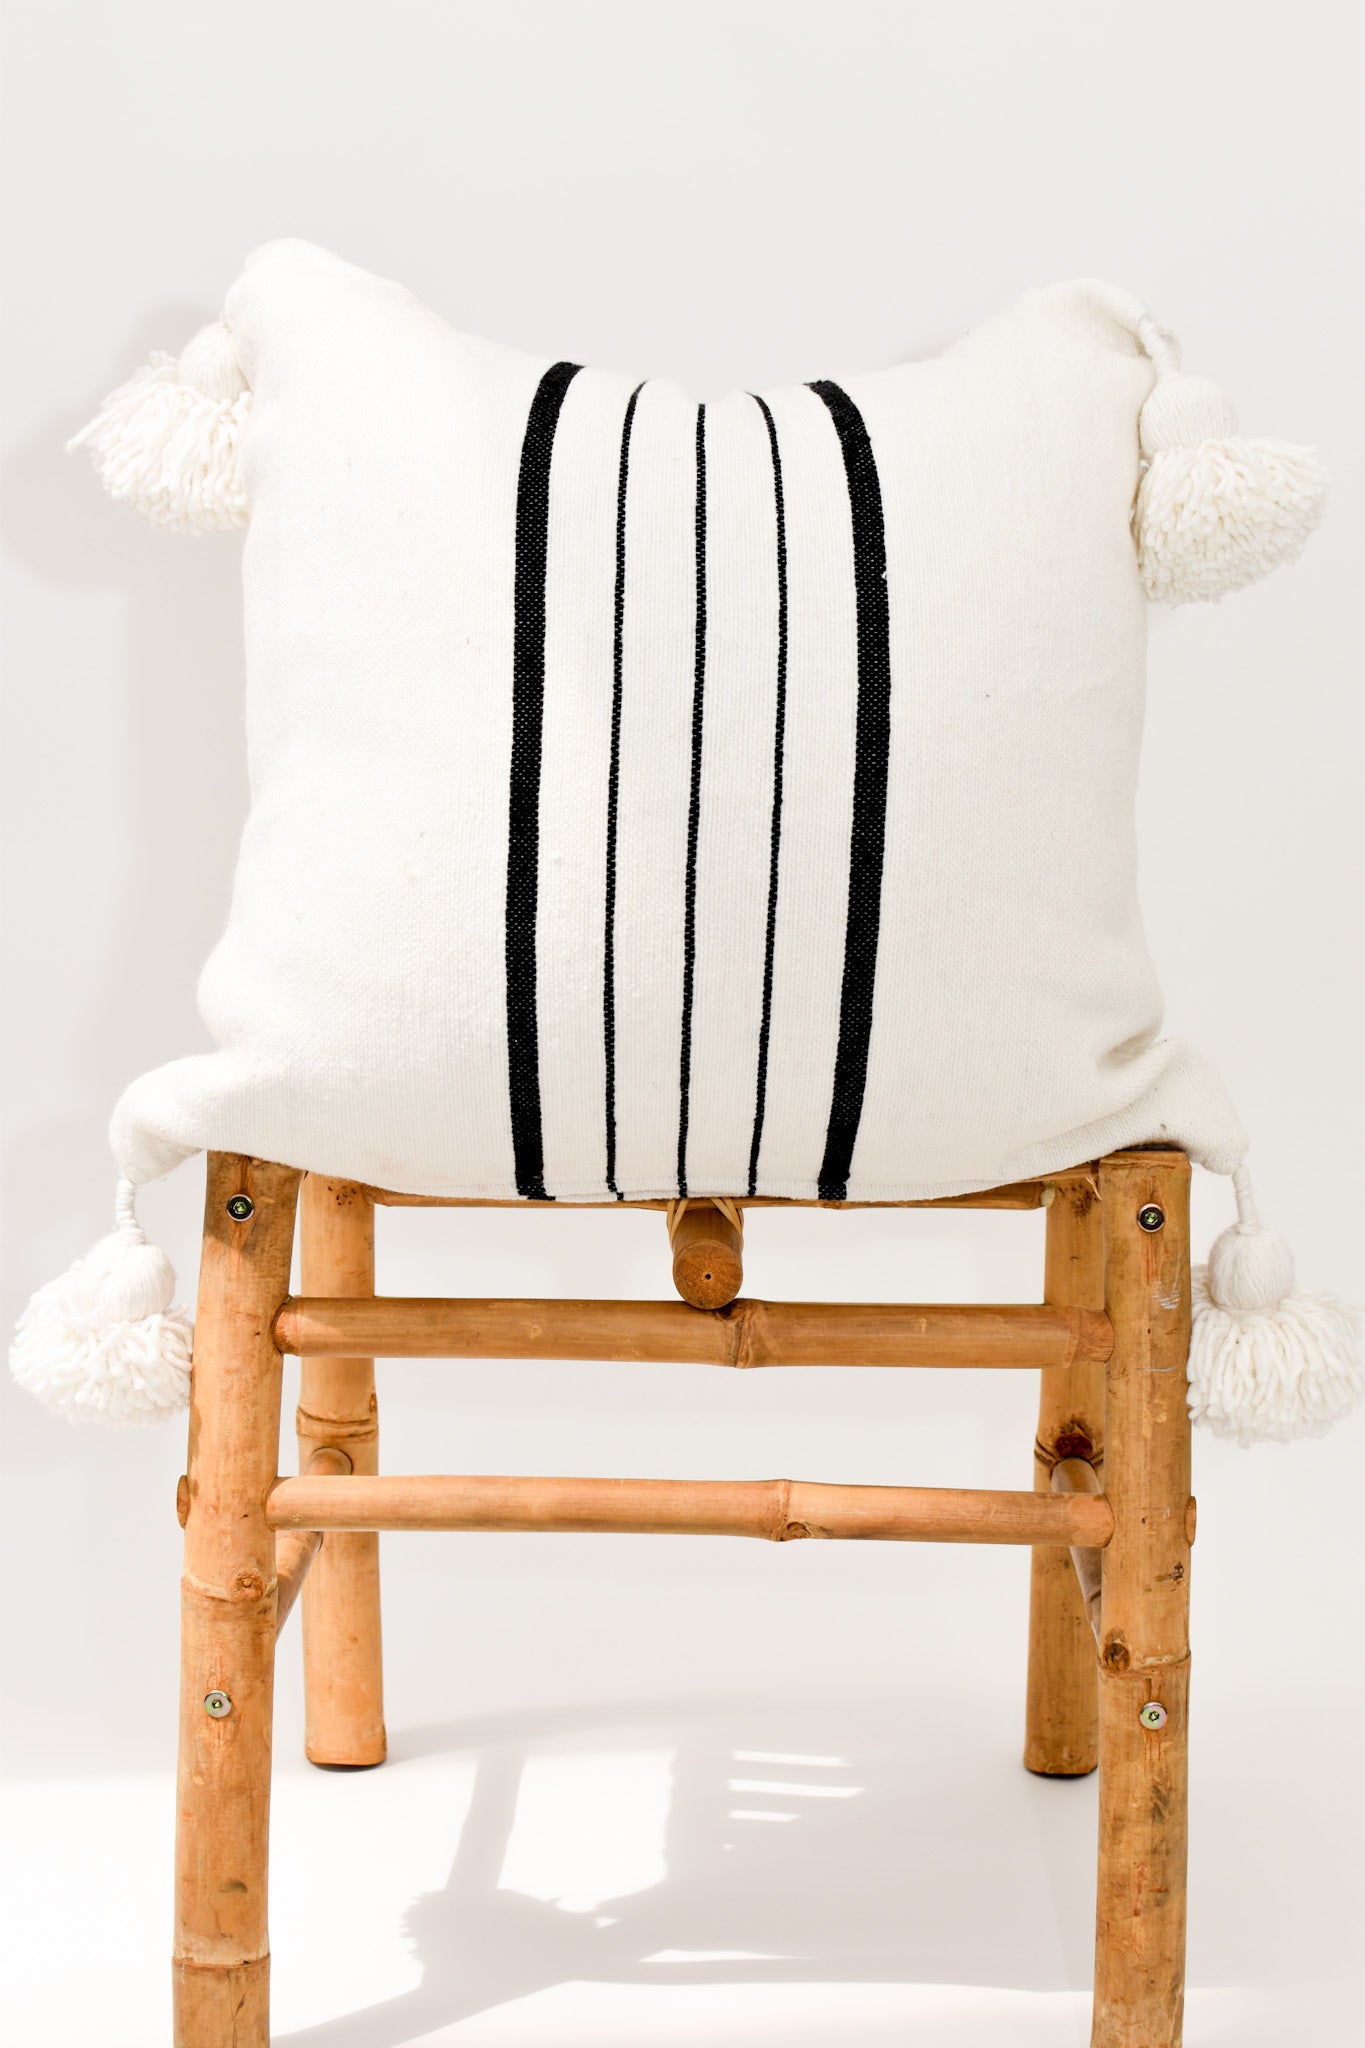 Handwoven Pom Pillow - White with Black Stripes and White Poms